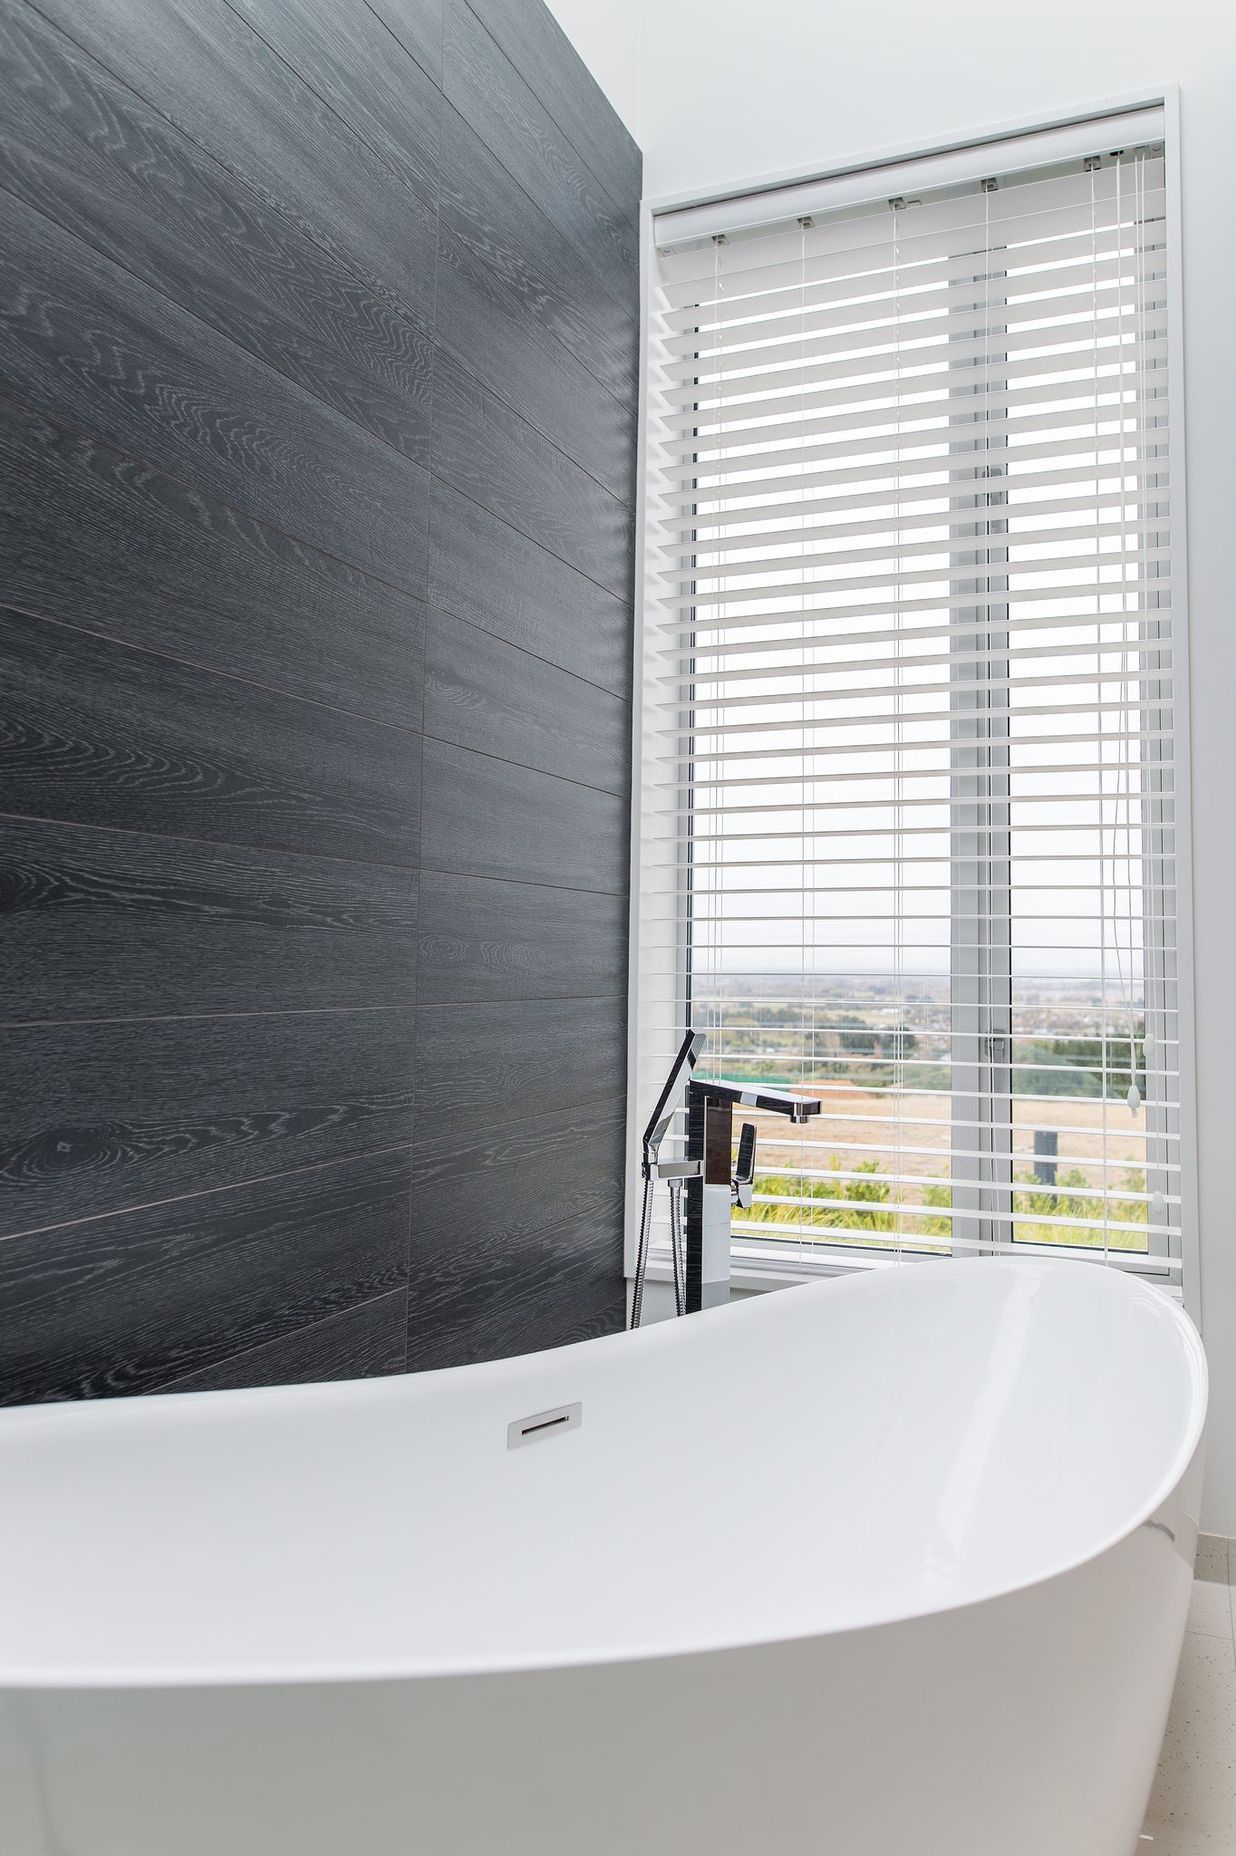 A picture window provides a far-reaching vista to enjoy from the free-standing tub.